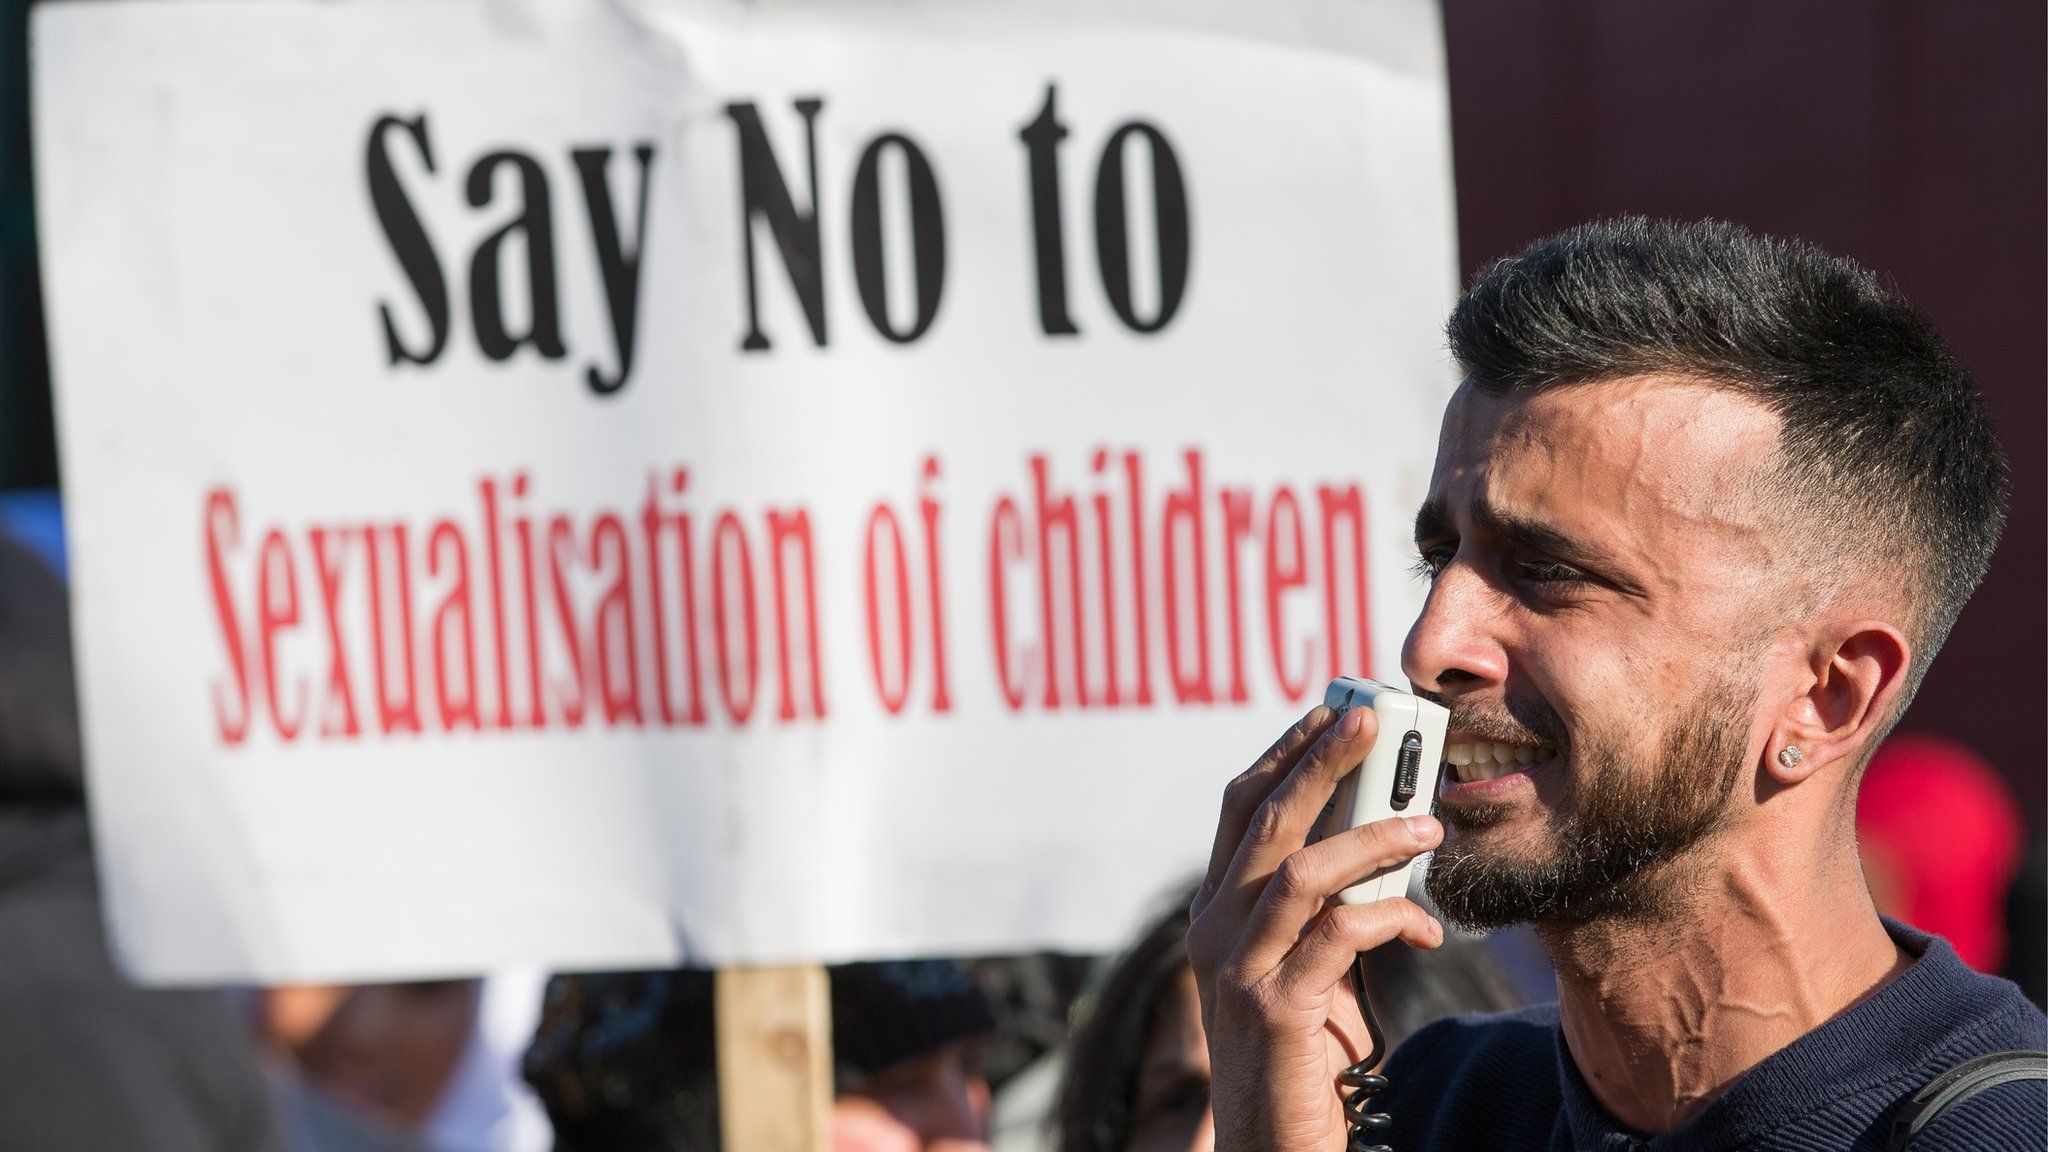 Police and parents at a protest outside a school. A placard reads "Say no to sexualisation of children"